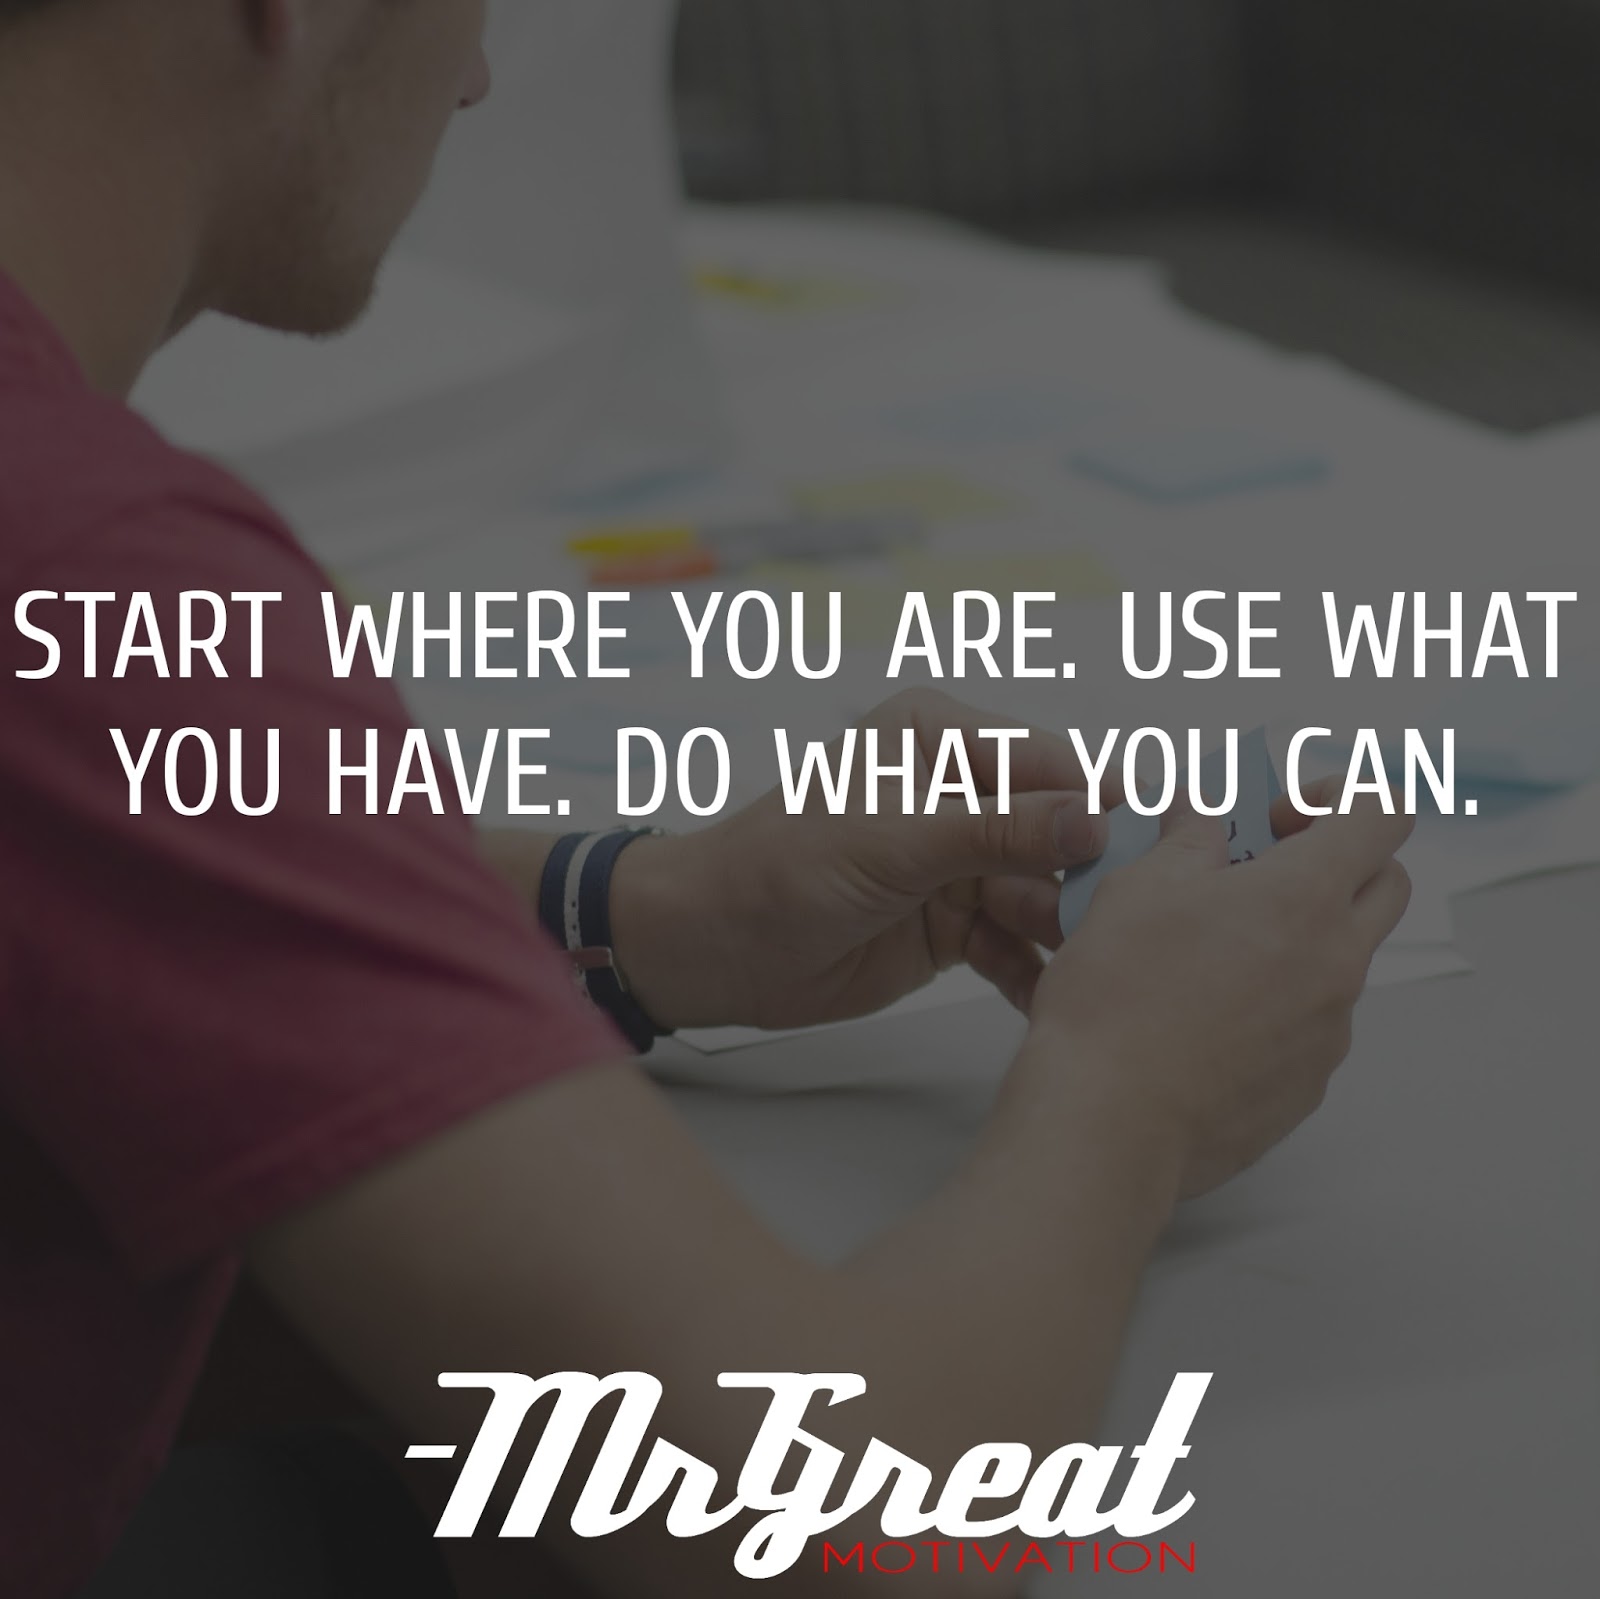 Start where you are Use what you have. Do what you can - Arthur Ashe